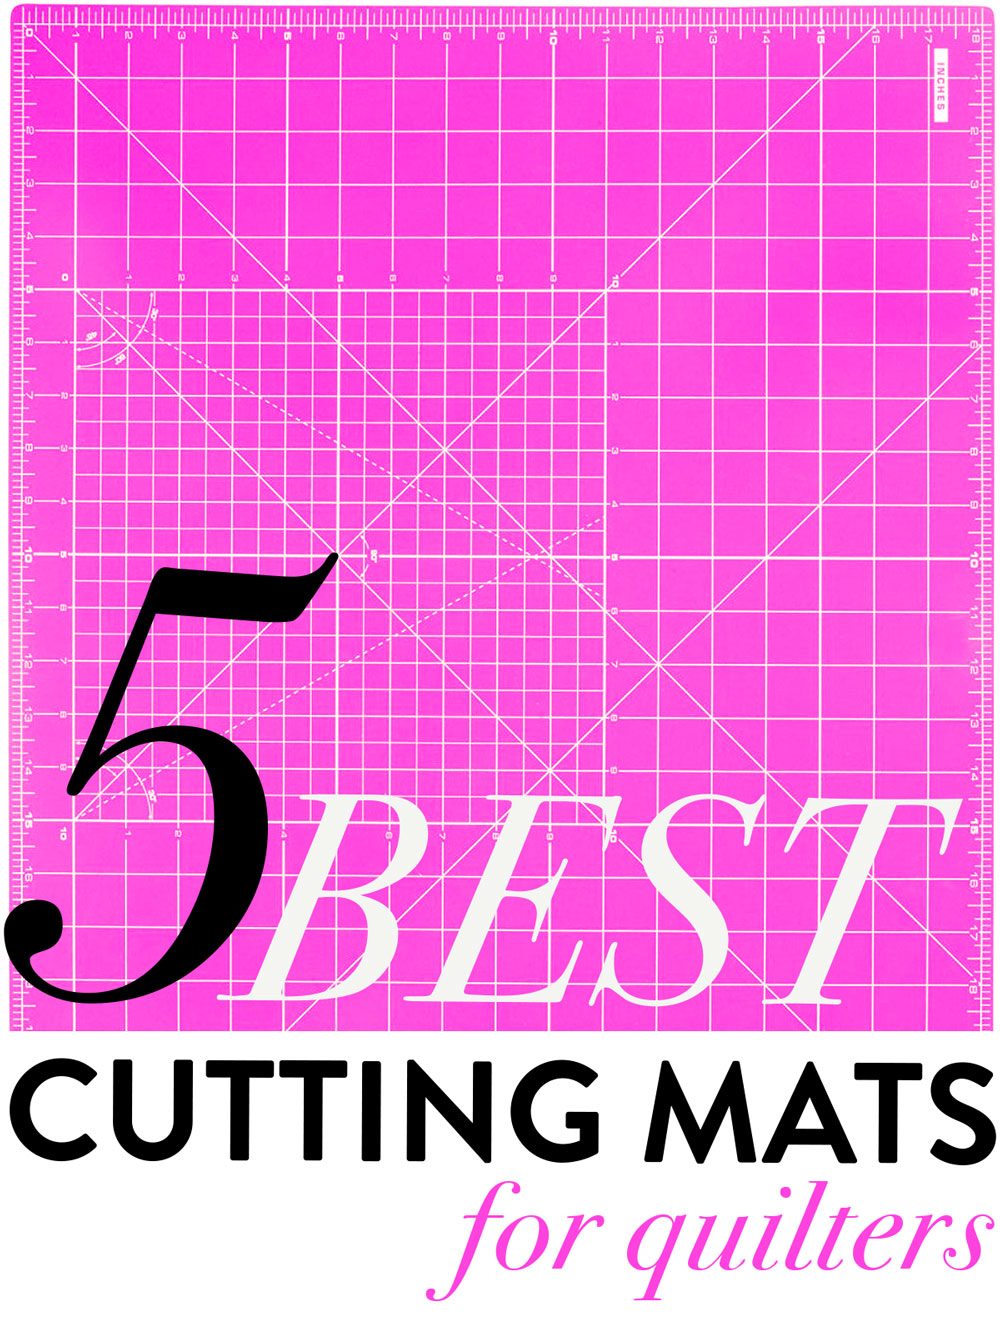 The 5 best cutting mats for quilters, sewers and crafters